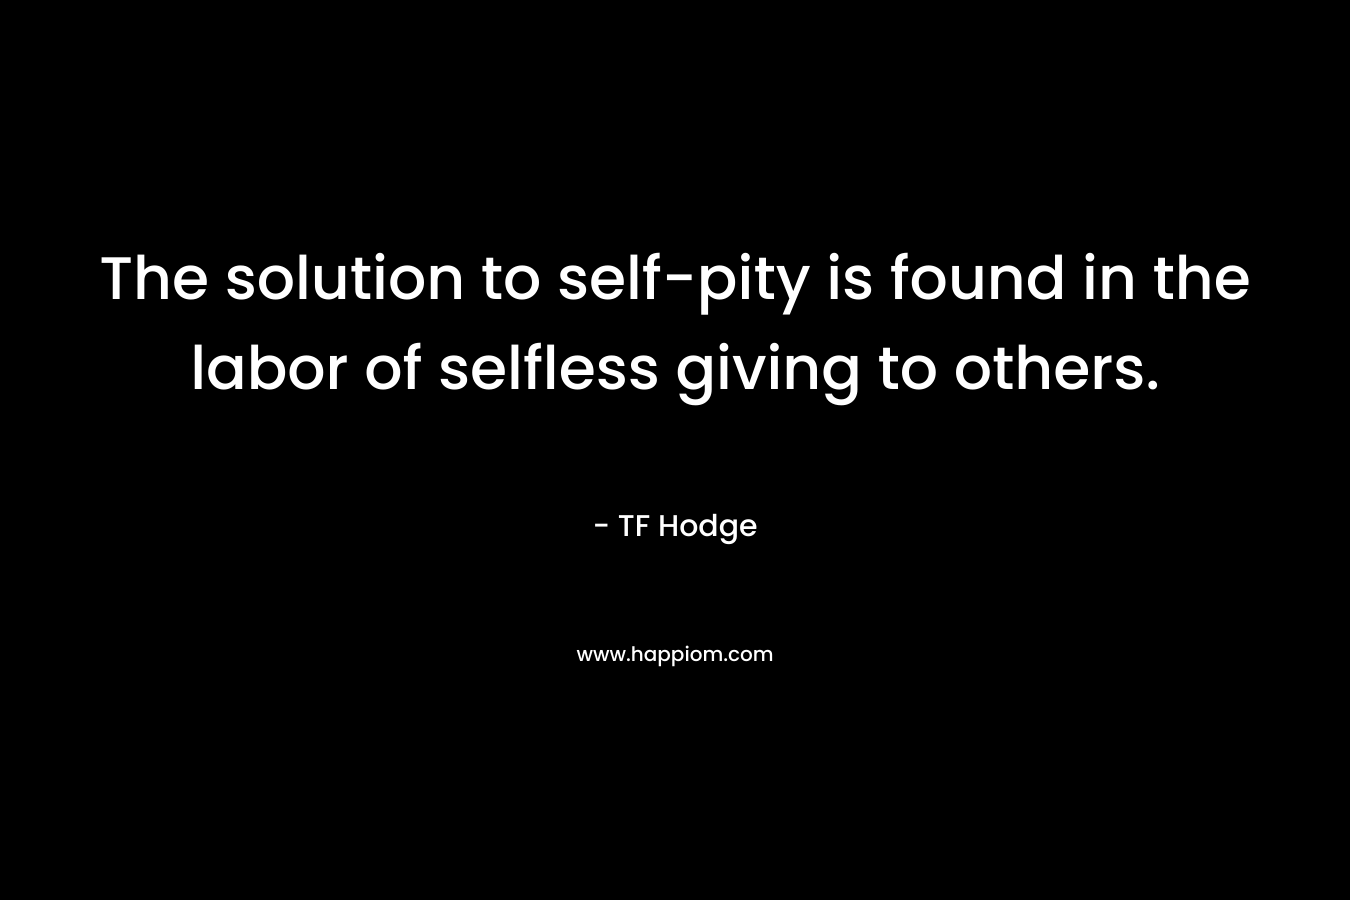 The solution to self-pity is found in the labor of selfless giving to others. – TF Hodge